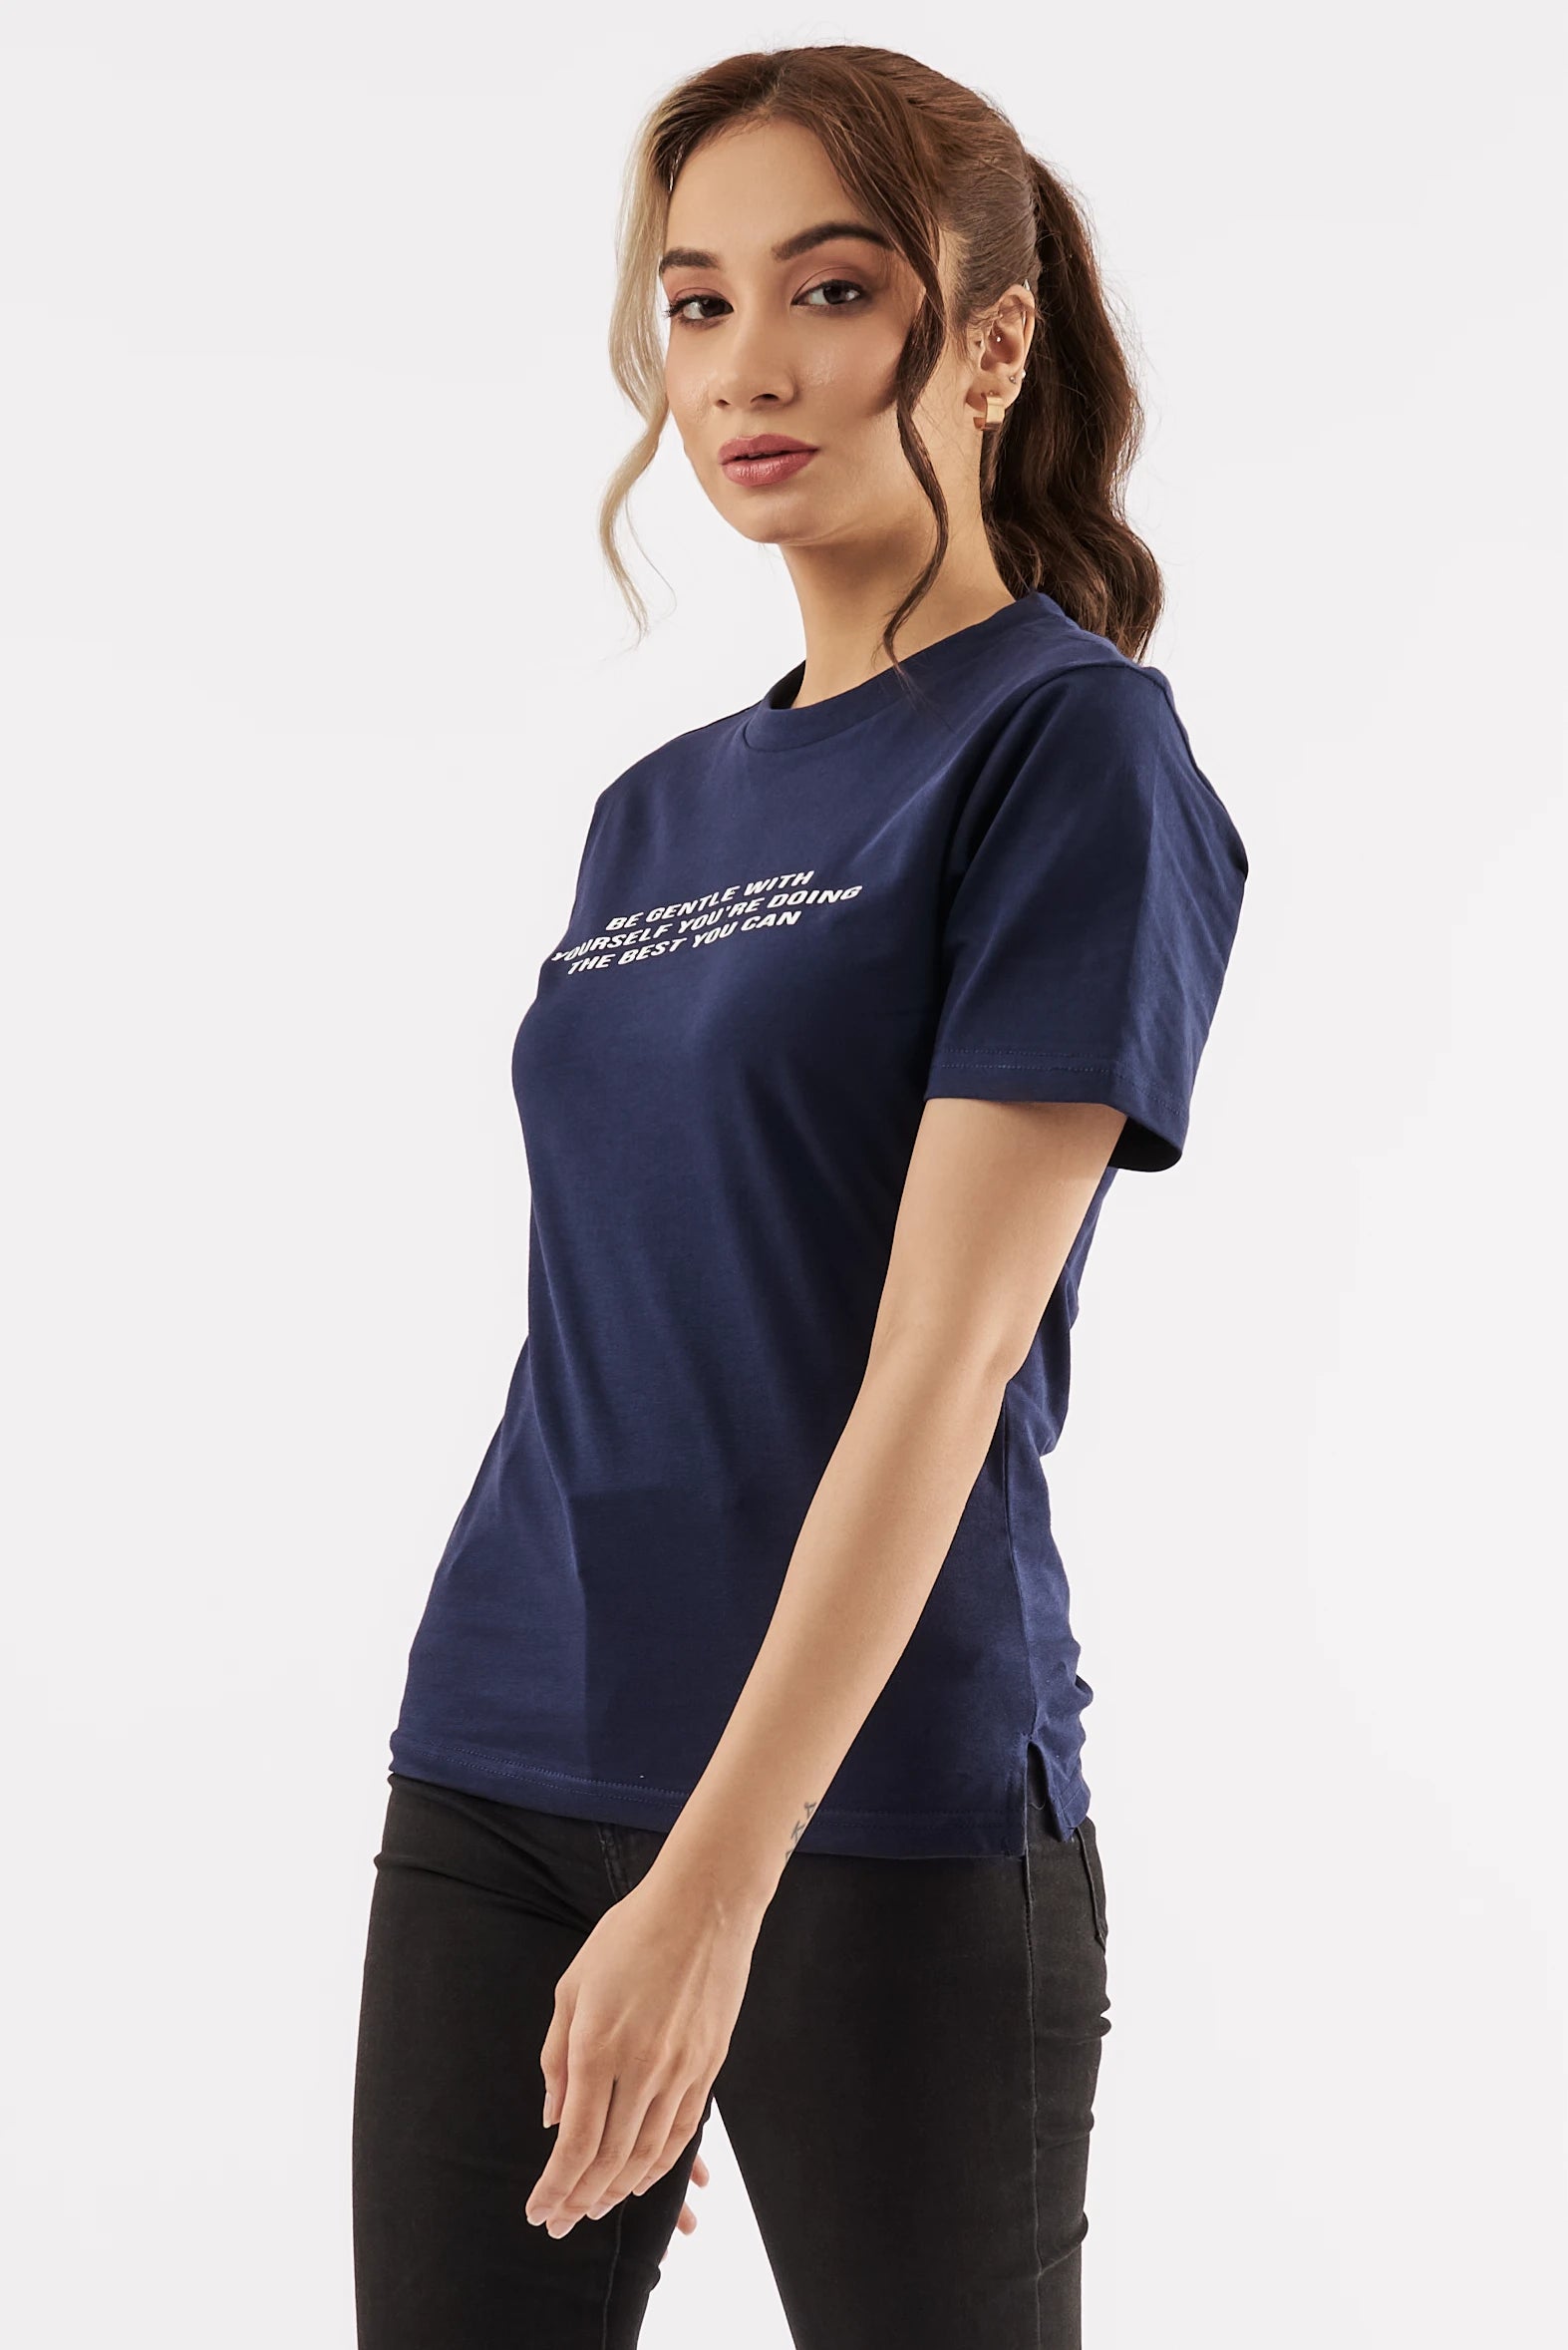 C&a - Women's T-Shirt - Authentic Brands For Less Online in Pakistan